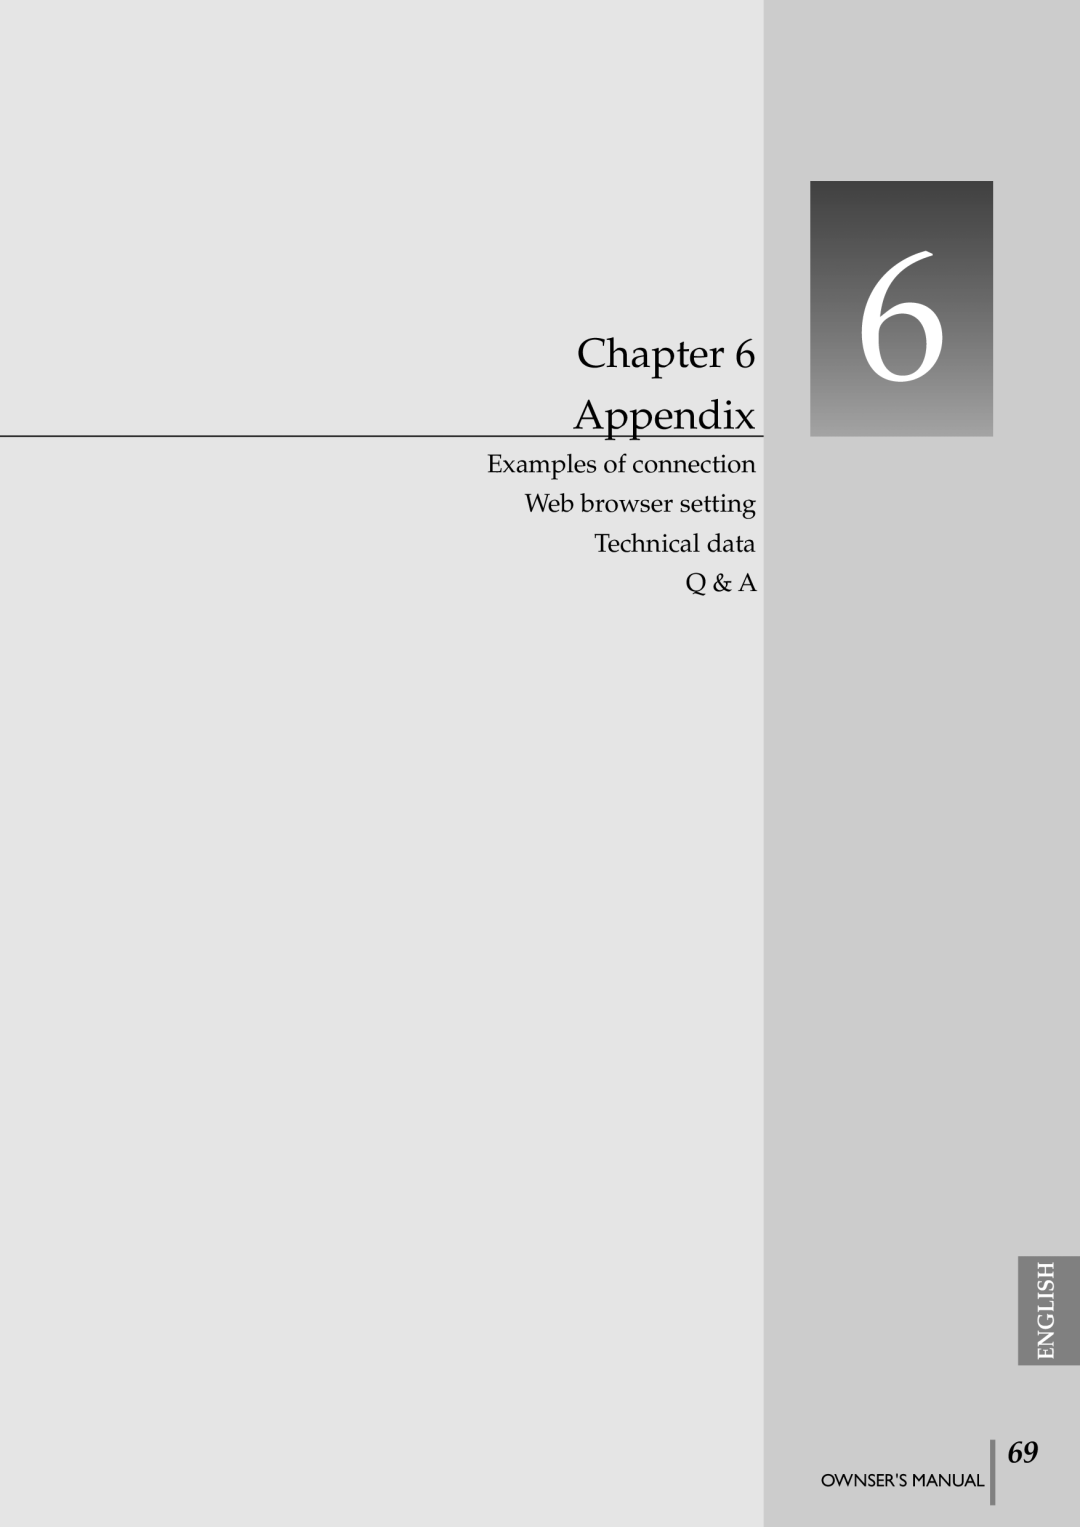 Eiki PJNET-300 Appendix, Examples of connection Web browser setting Technical data Q & A, Chapter, English, Ownsers Manual 